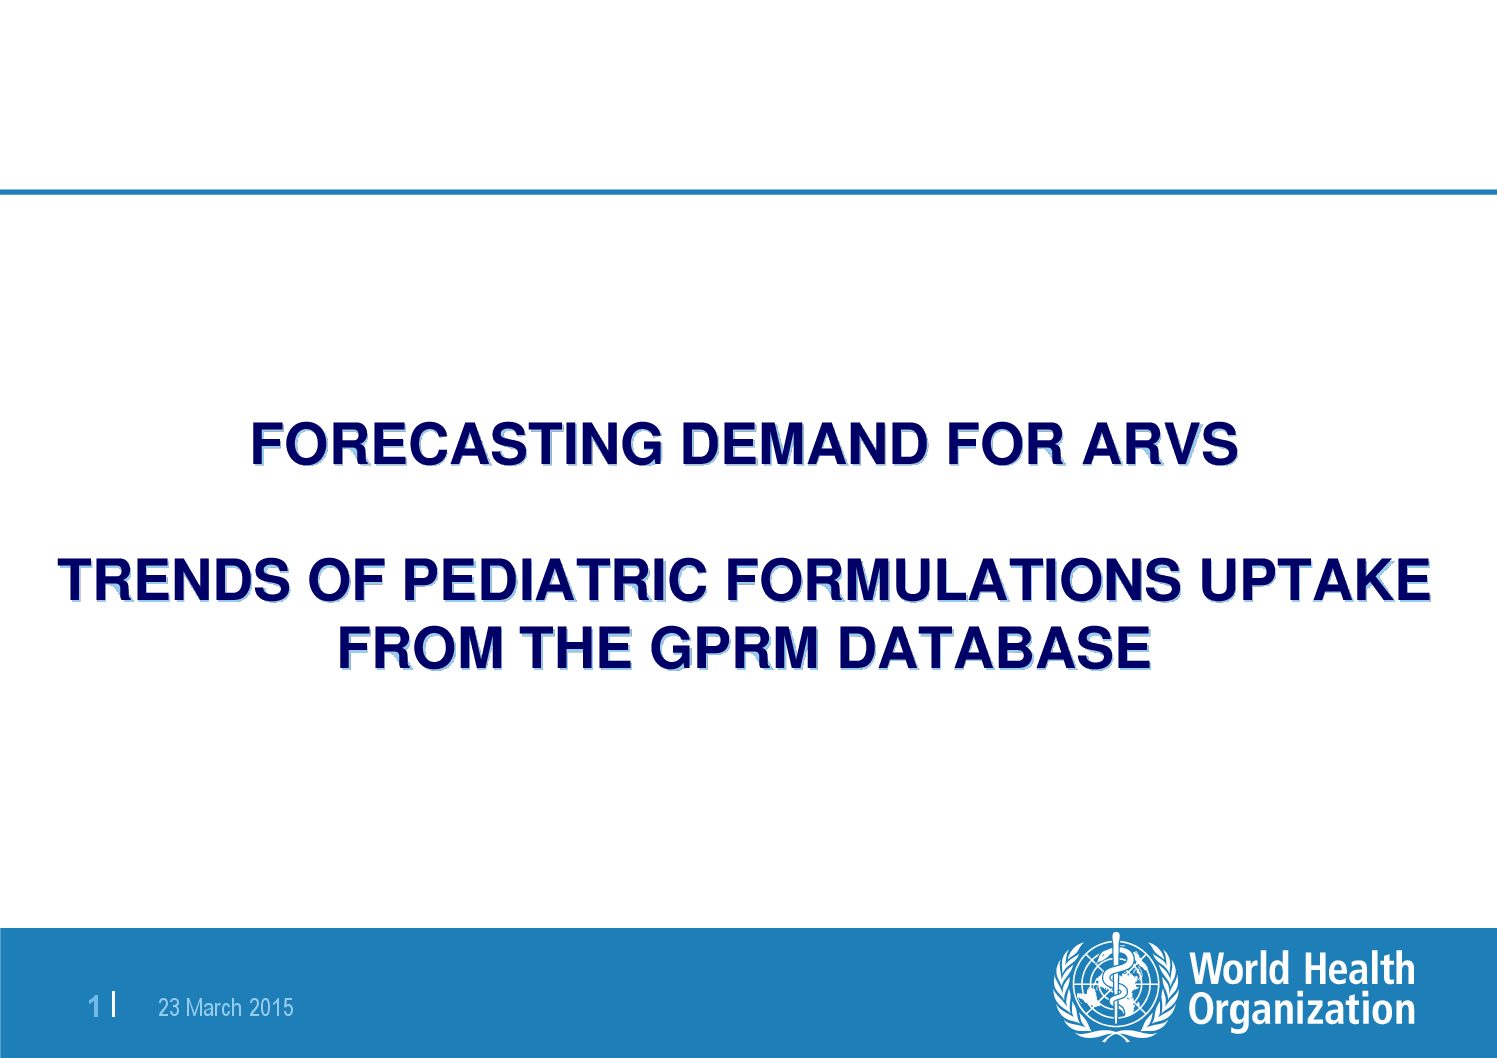 Forecasting demand for ARV’s trends of pediatric formularions uptake from the GPRM Database